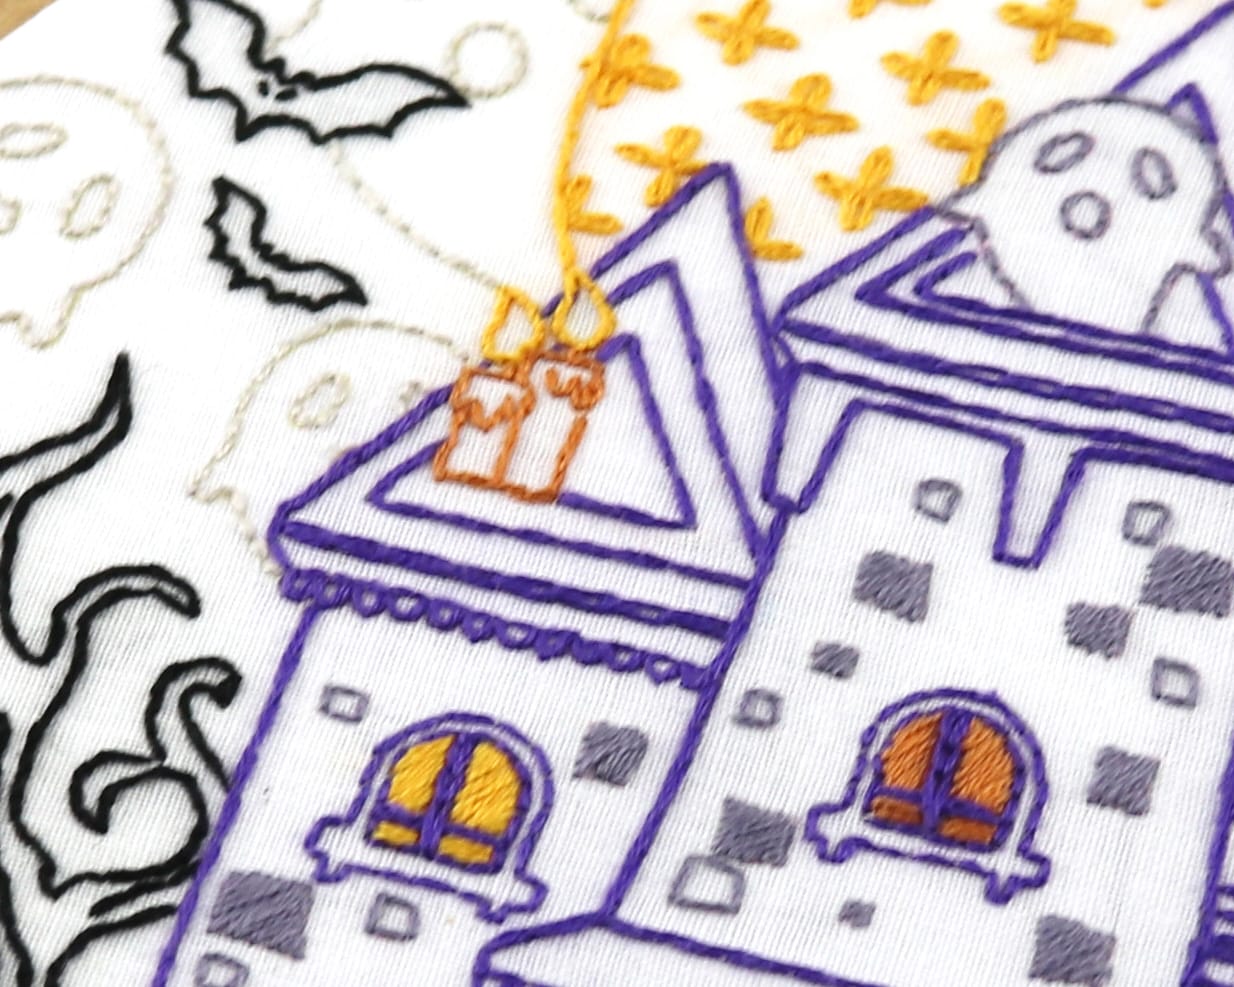 Embroidered details from halloween hoop art